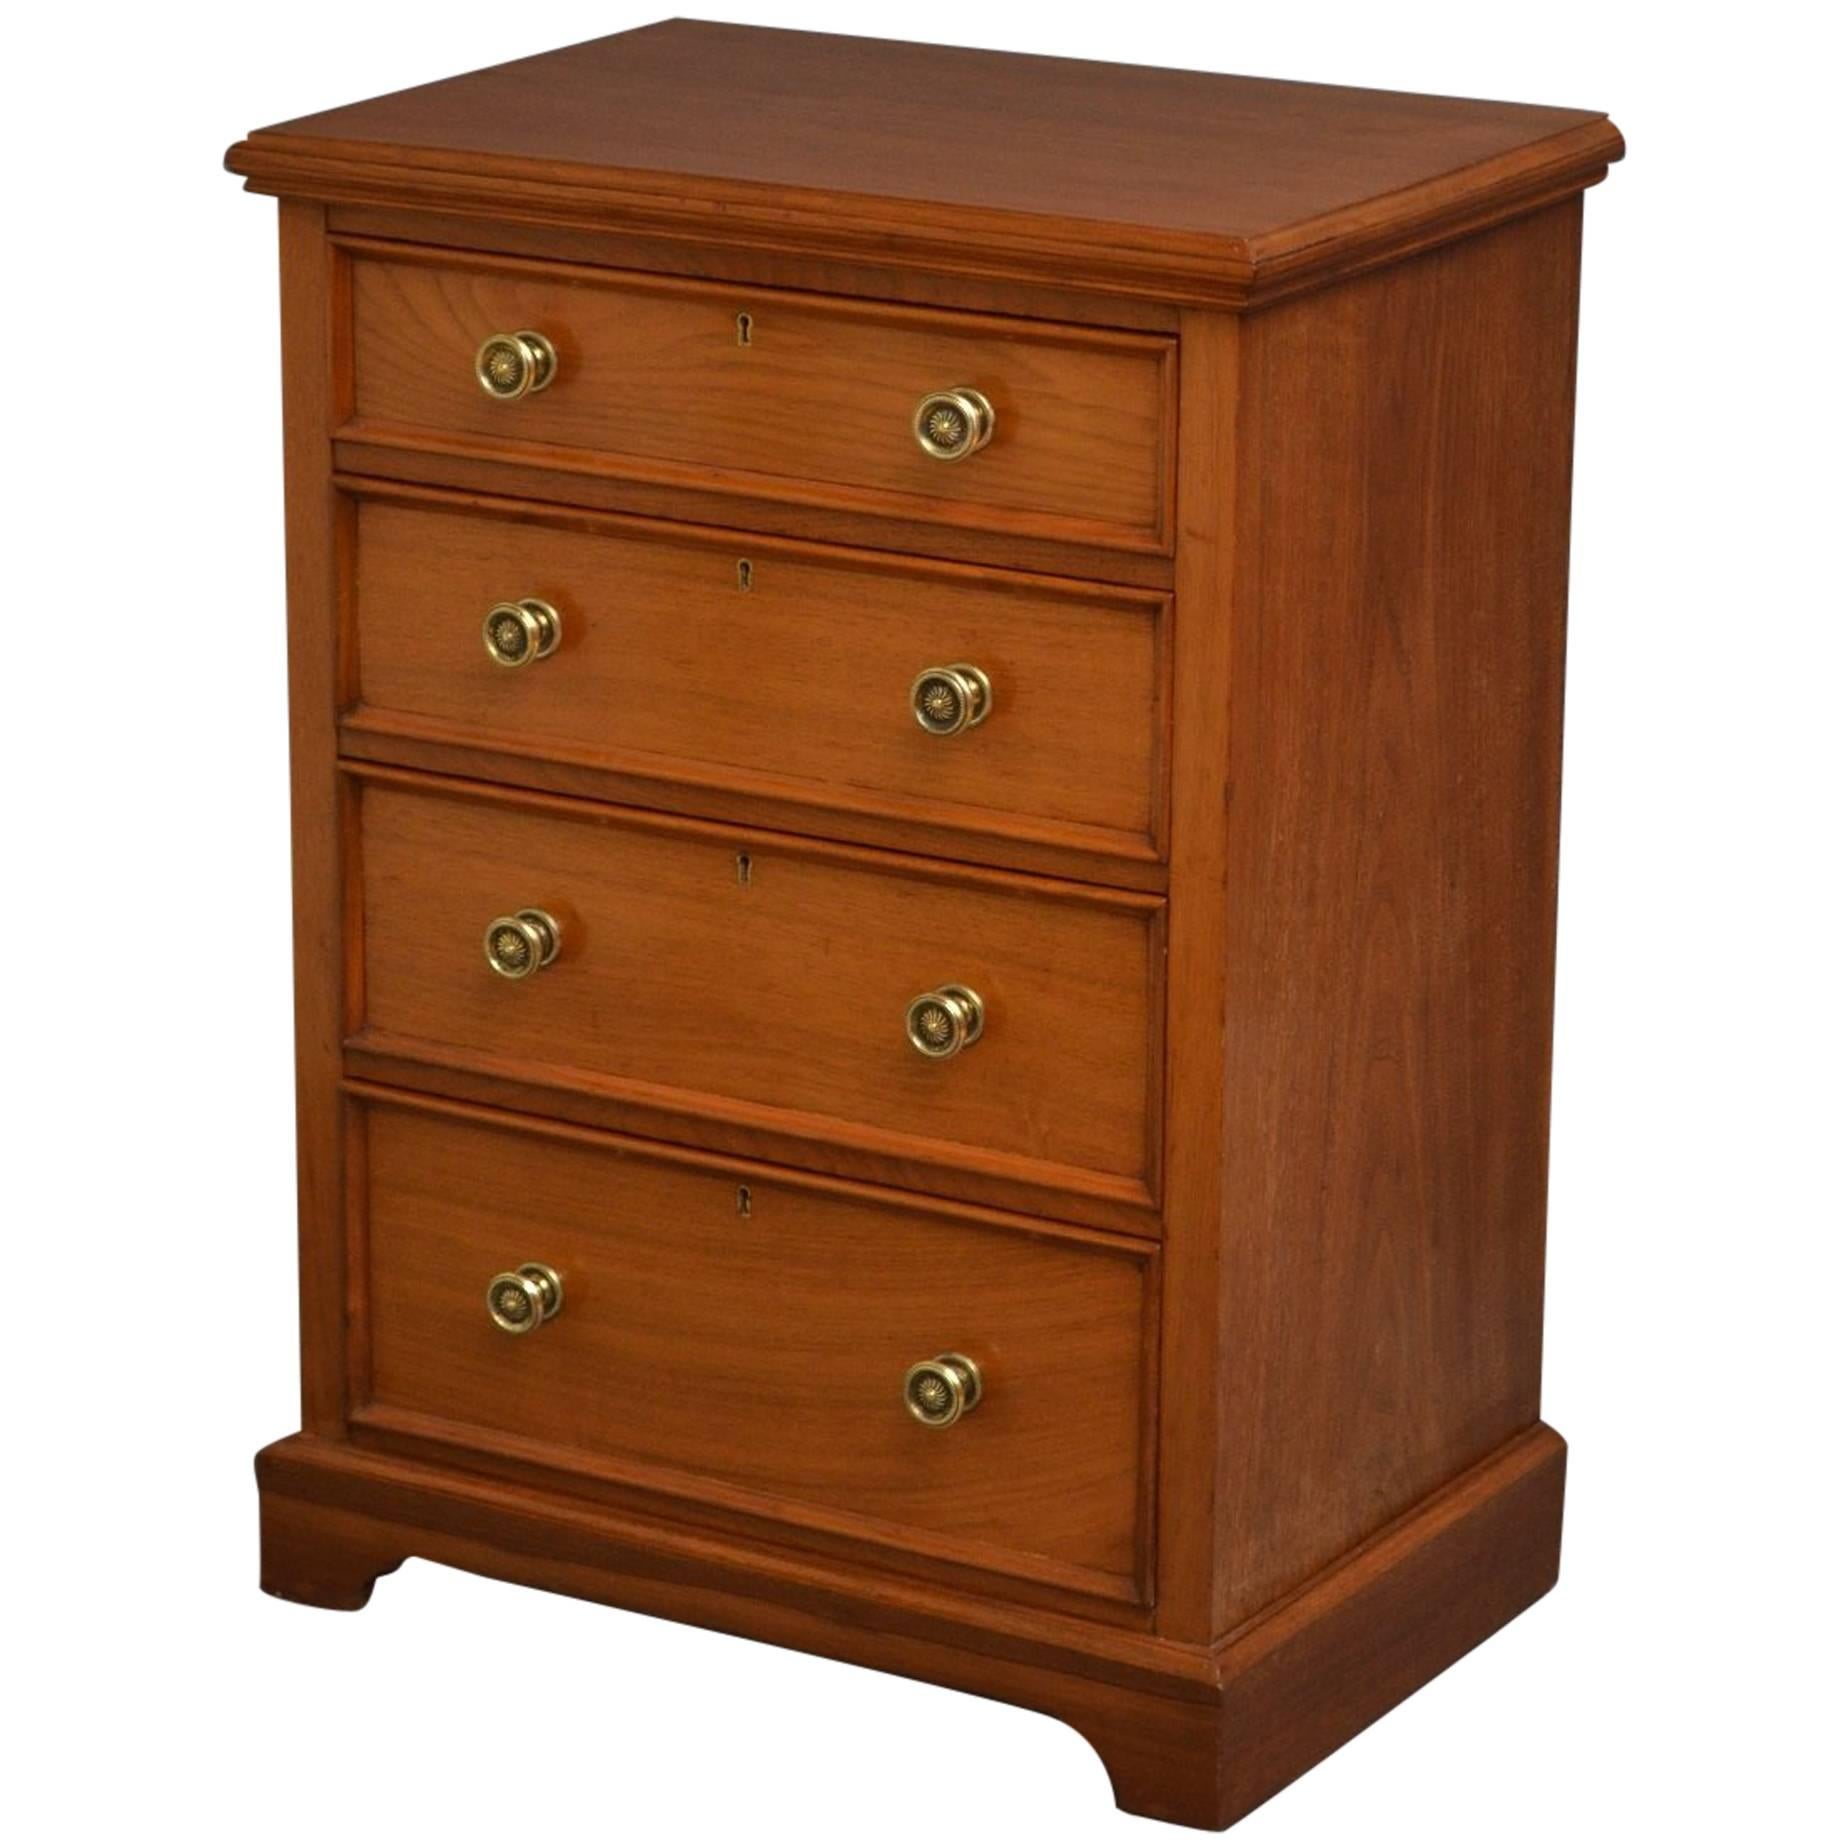 Small Victorian Chest of Drawers by J. Shoolbred